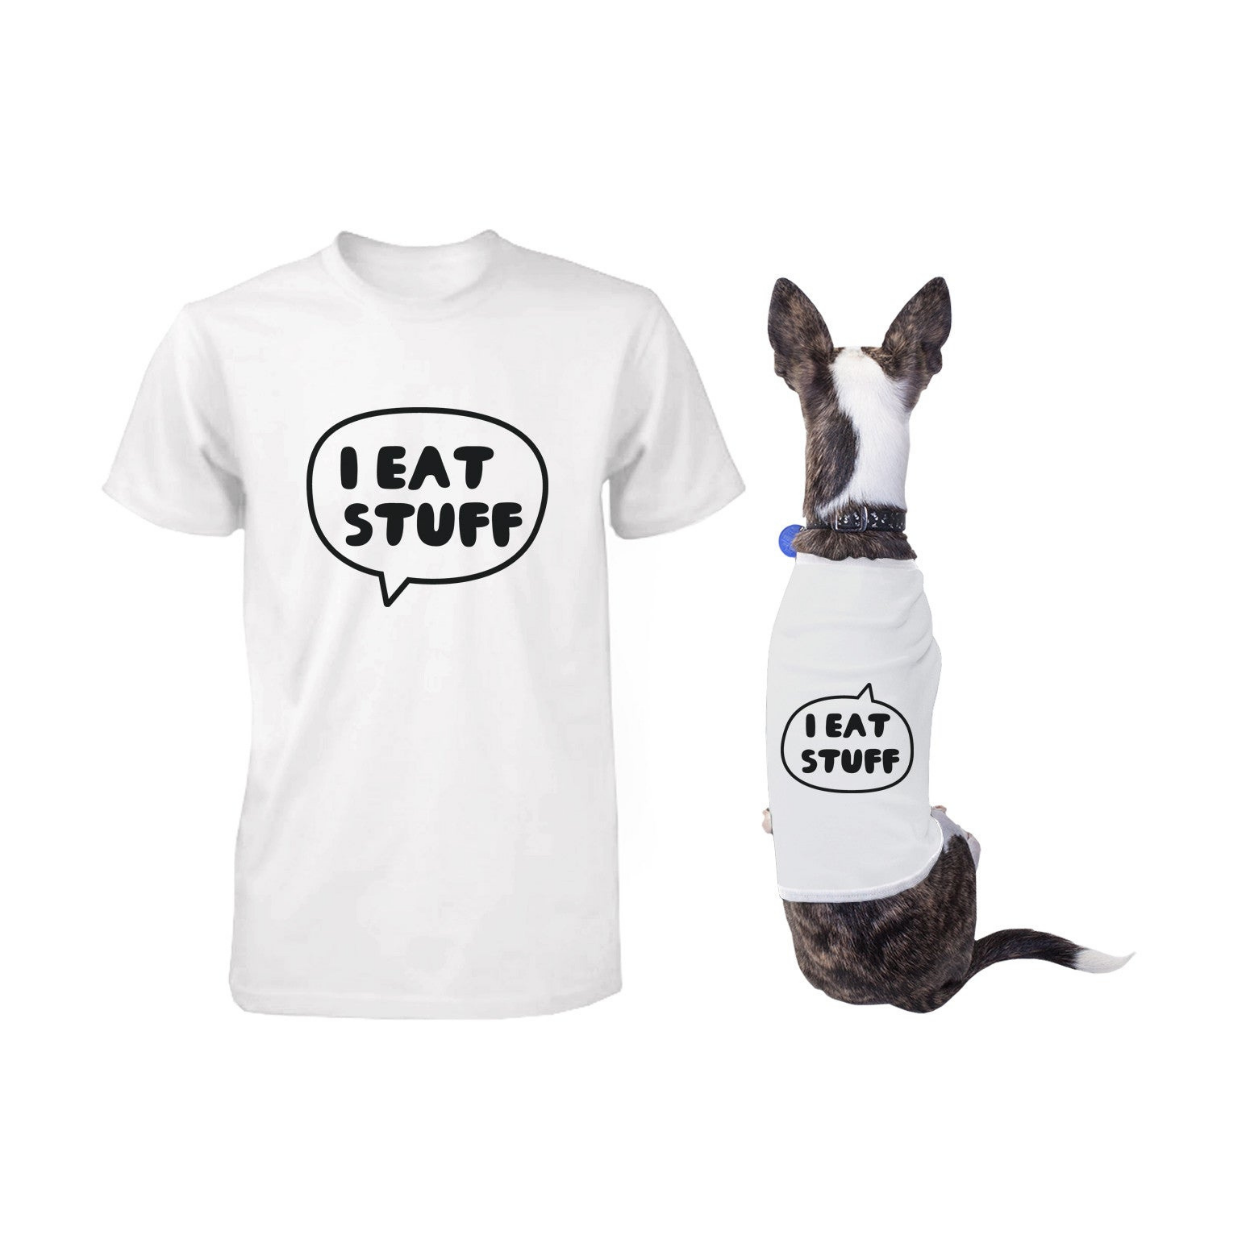 I Eat Stuff Matching Shirts For Human And Pet Funny Tees For Owner And Dog - 365 In Love